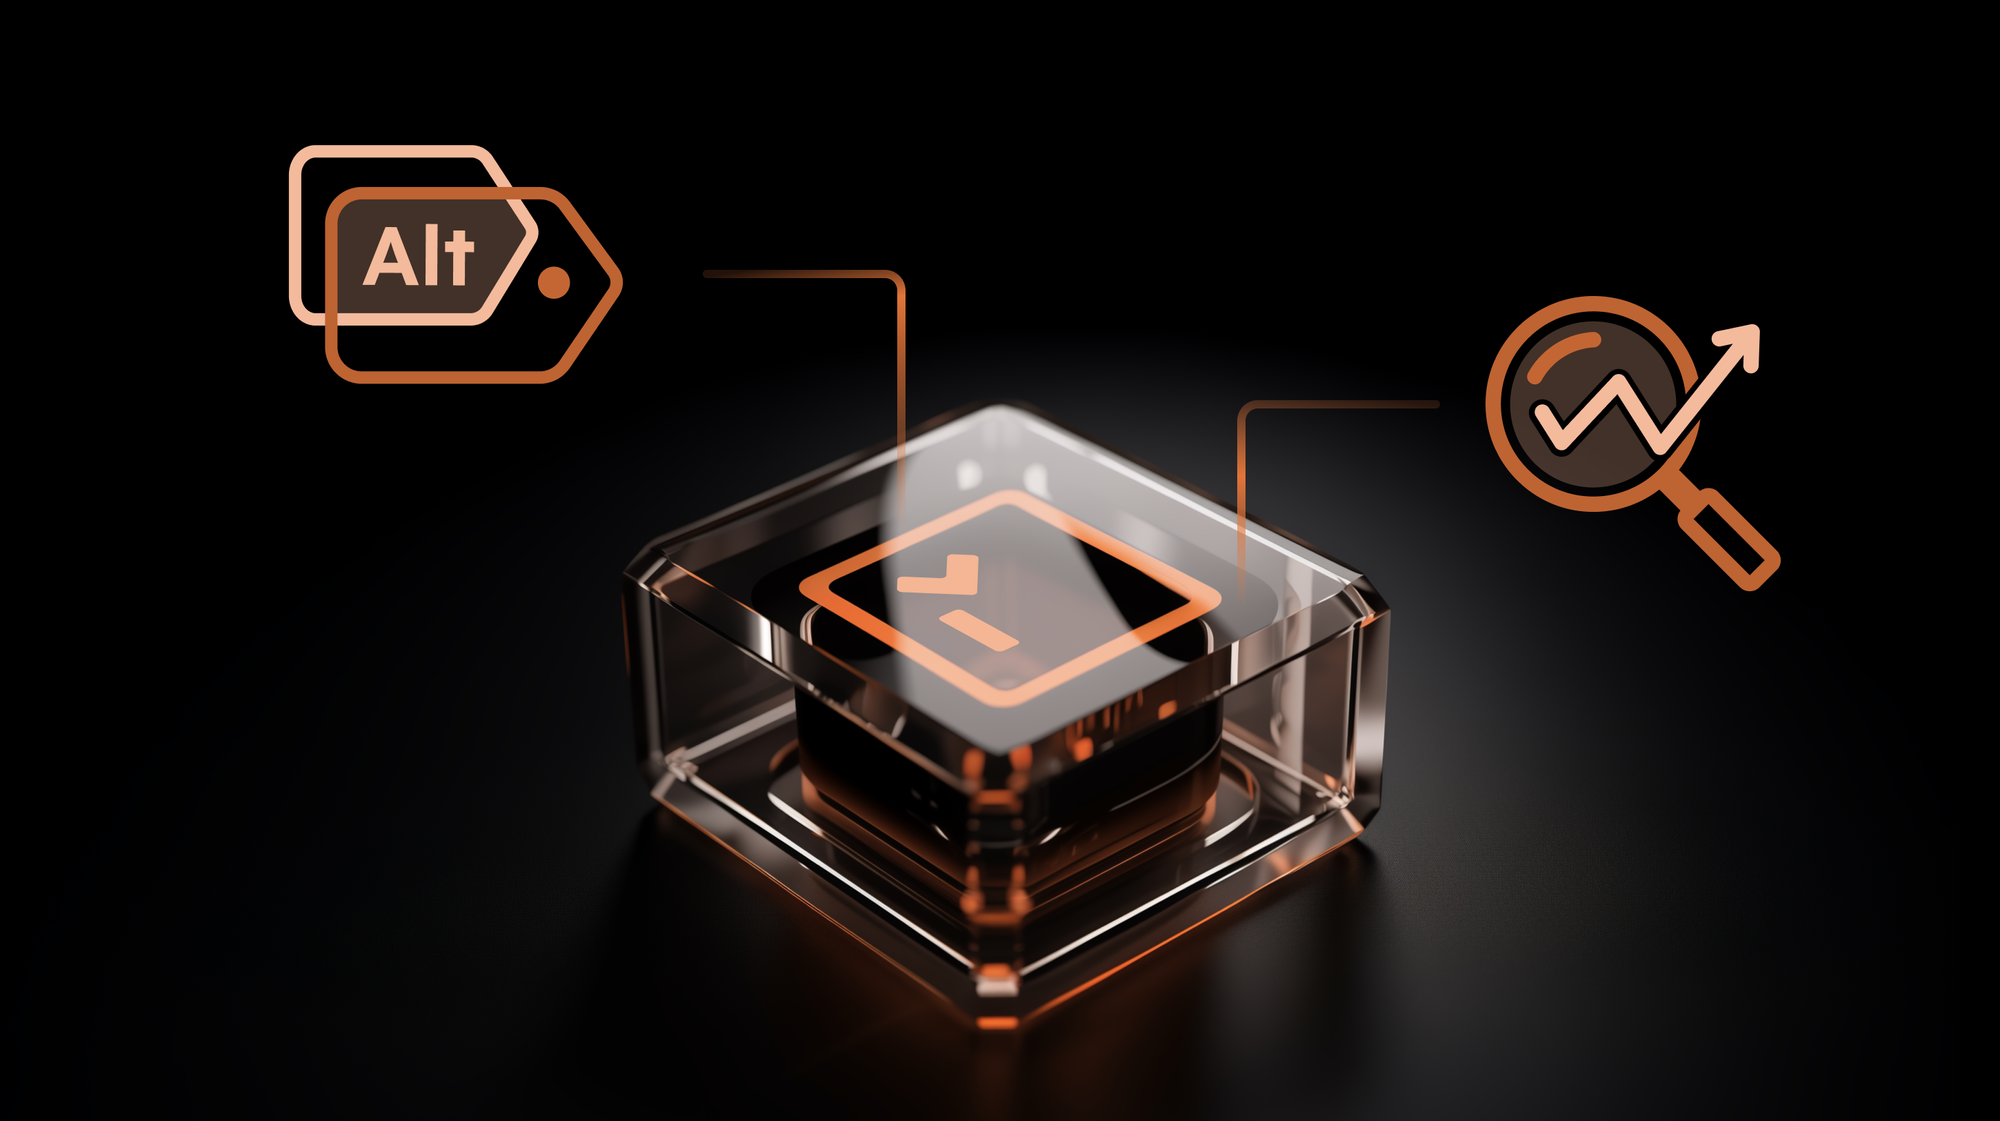 Futuristic transparent cube with a central chip and copper accents on a dark background, symbolizing cutting-edge technology.